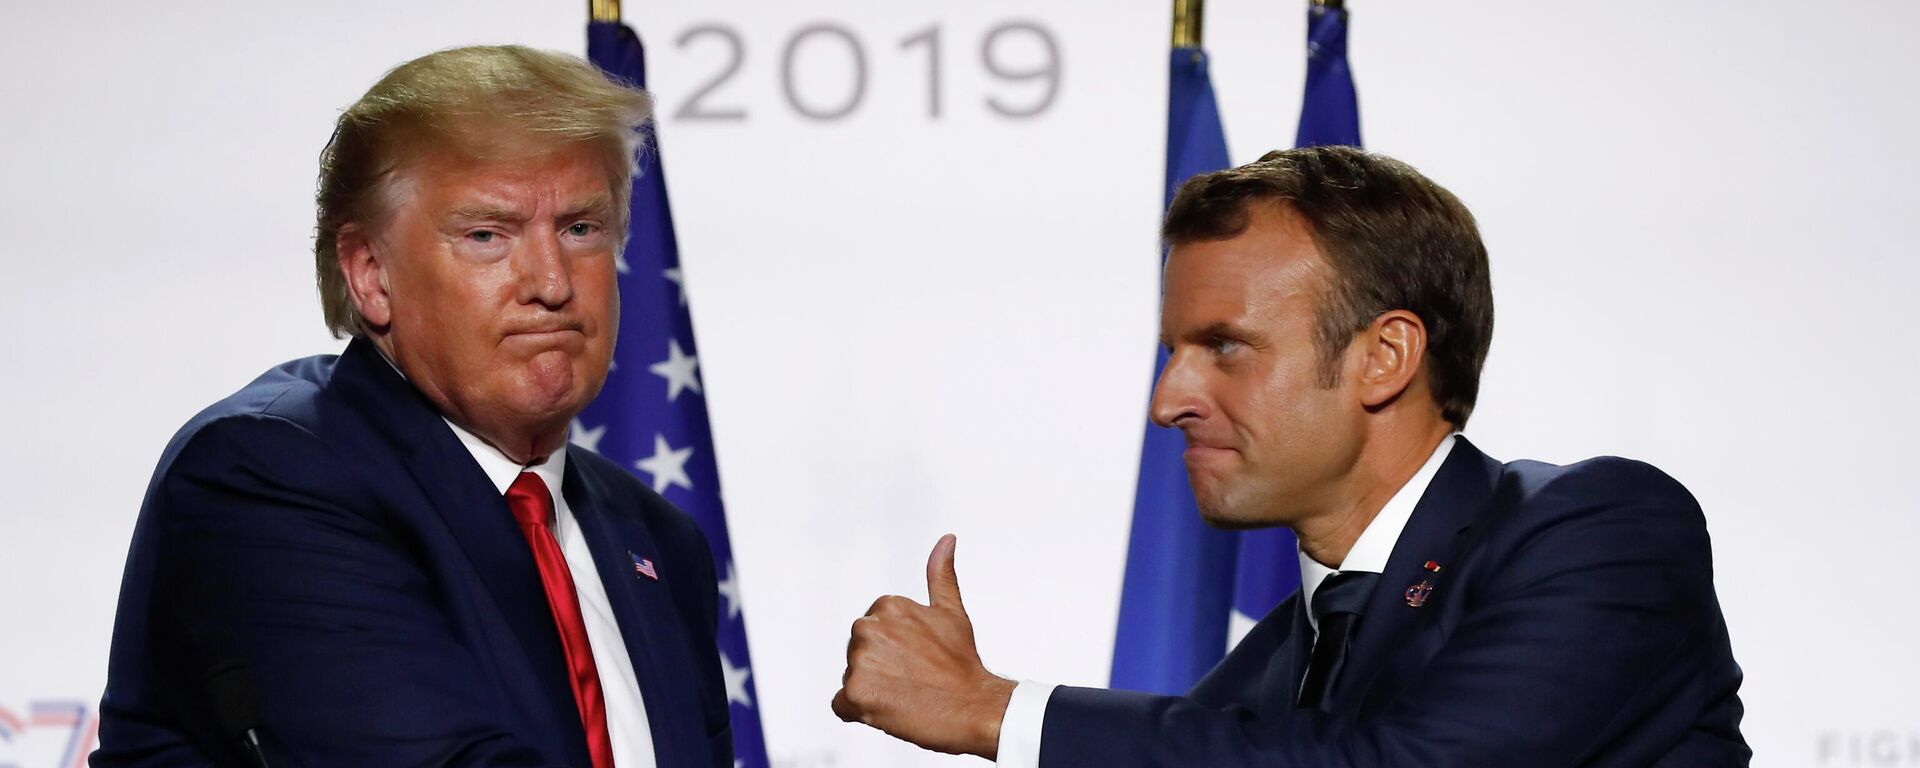 In this Aug. 26, 2019, file photo, French President Emmanuel Macron and U.S President Donald Trump shake hands during the final press conference during the G7 summit in Biarritz, southwestern France.  - Sputnik International, 1920, 30.08.2022